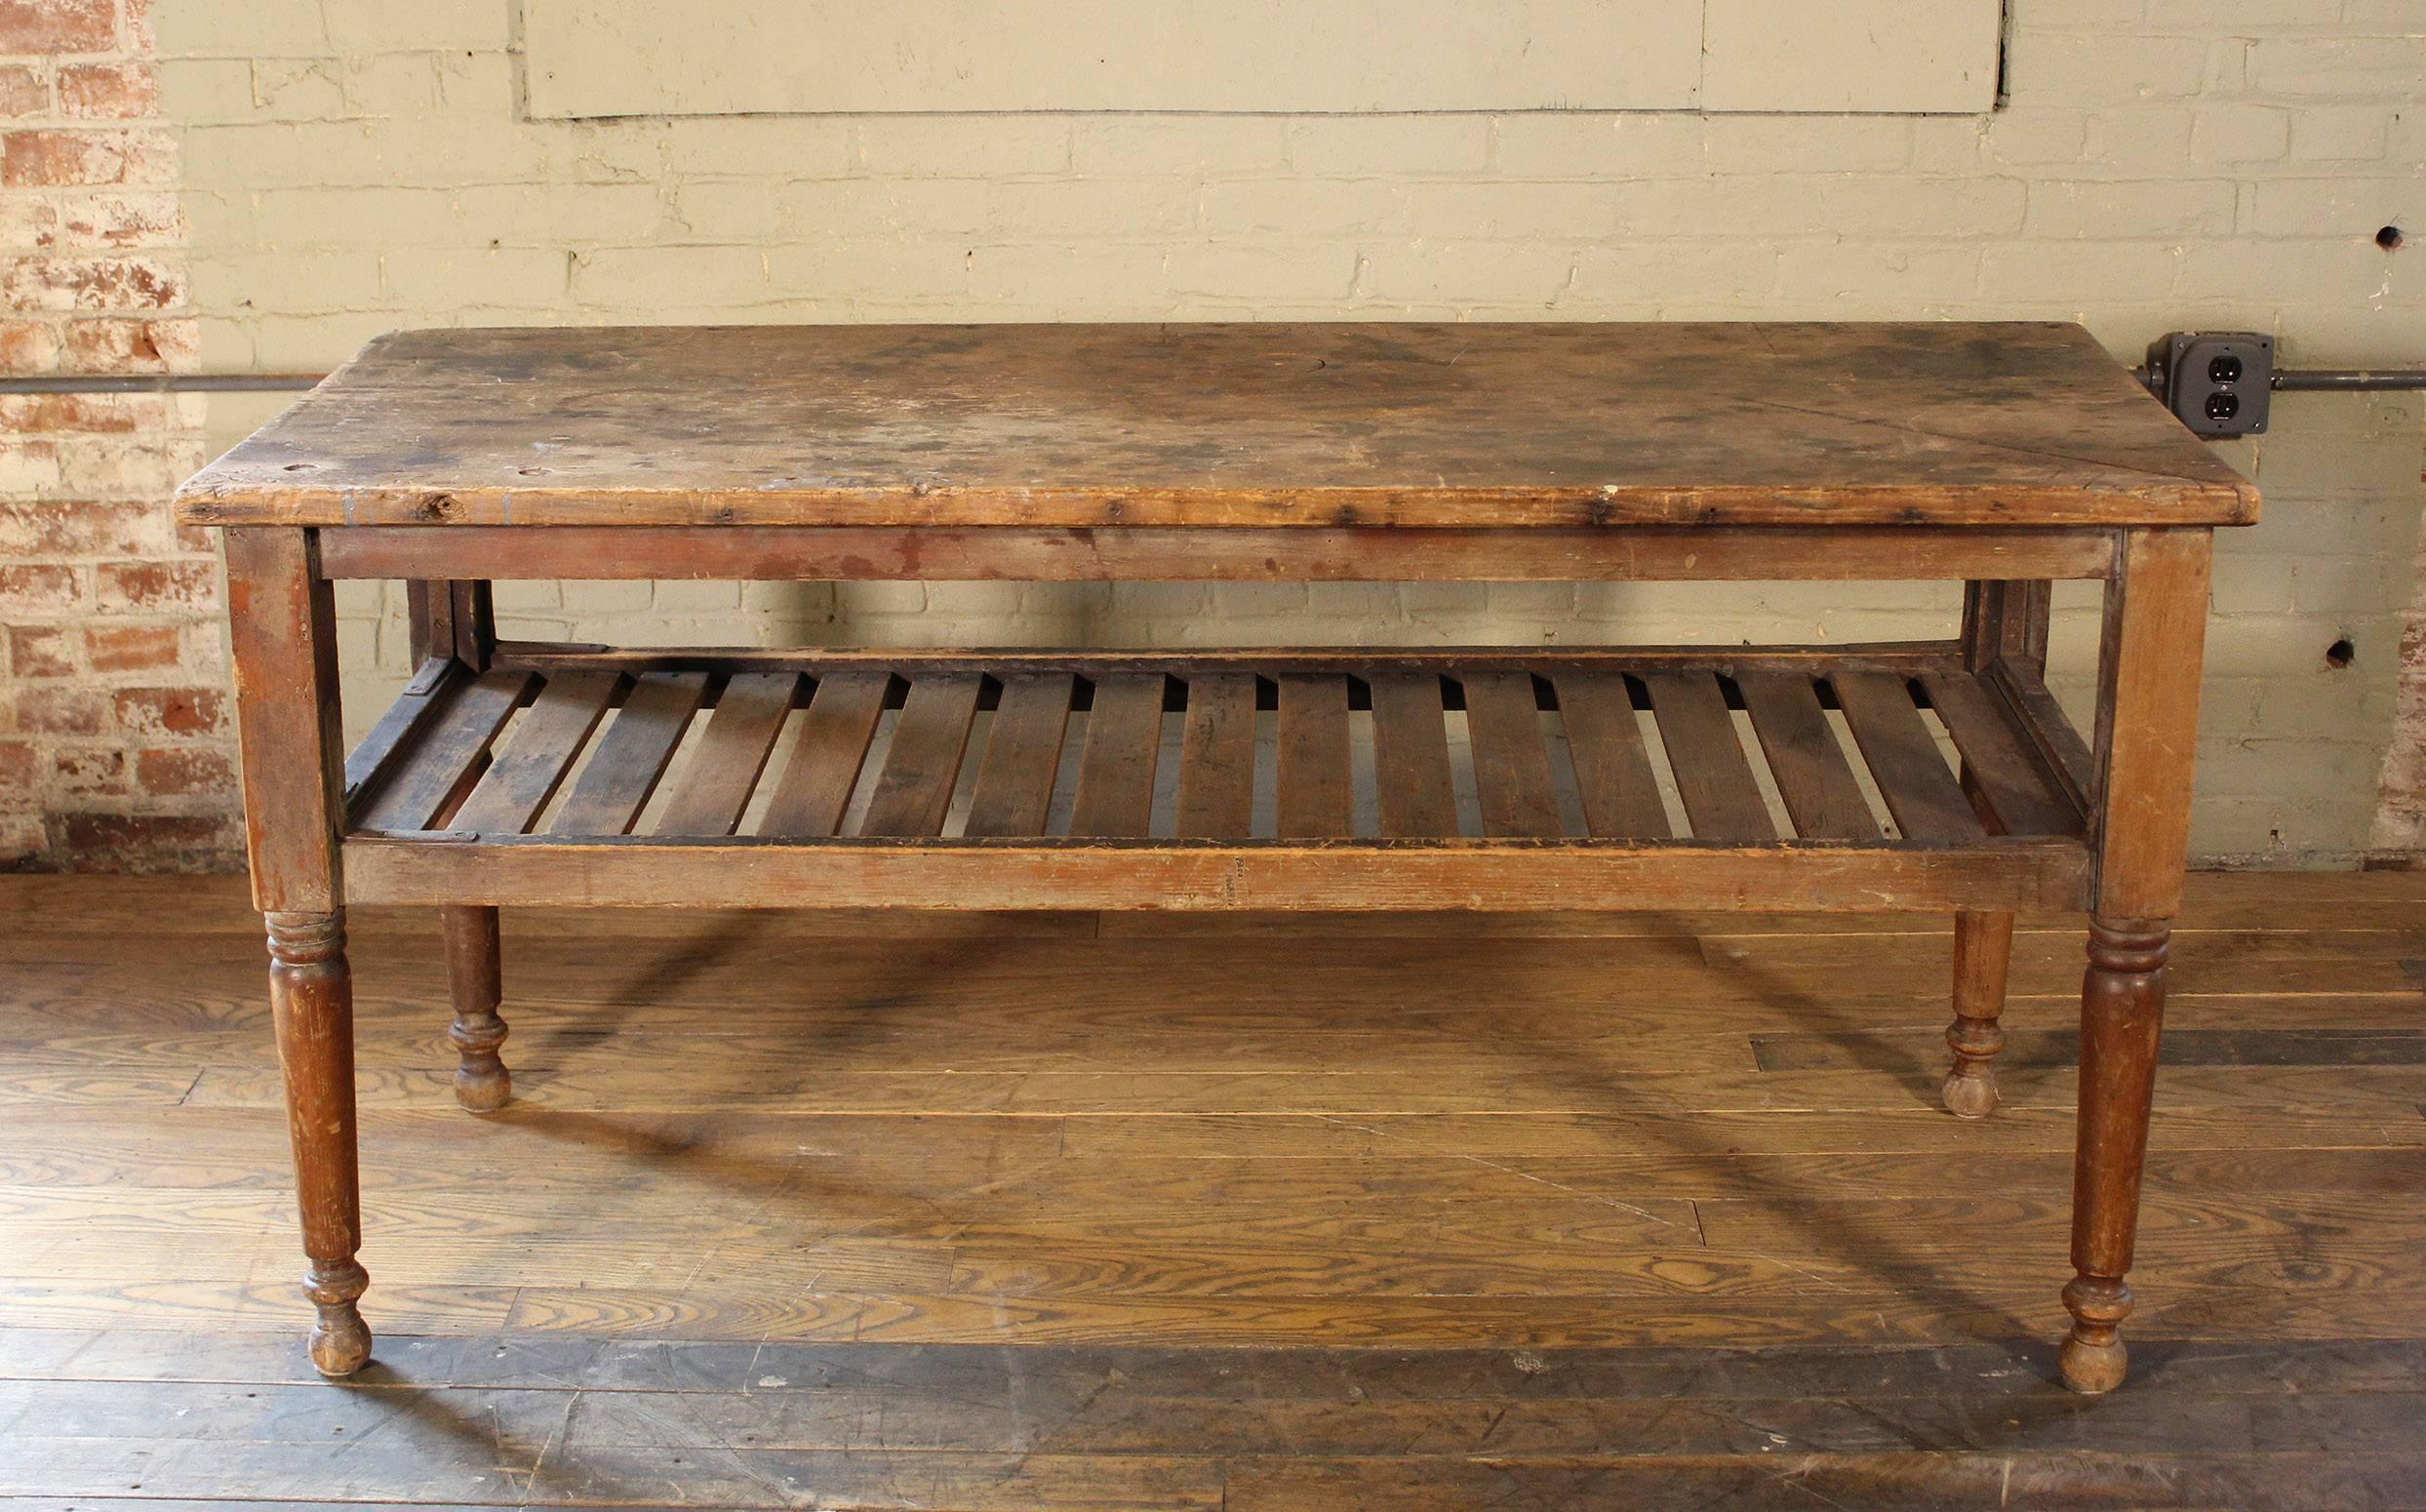 Beautiful antique vintage Country Farm console rustic wooden table, perfect for retail display. Wood is pine. Top is a single board. Features forged iron brackets and turned legs. Overall dimensions are 59 1/2" x 24" x 29 1/4" in